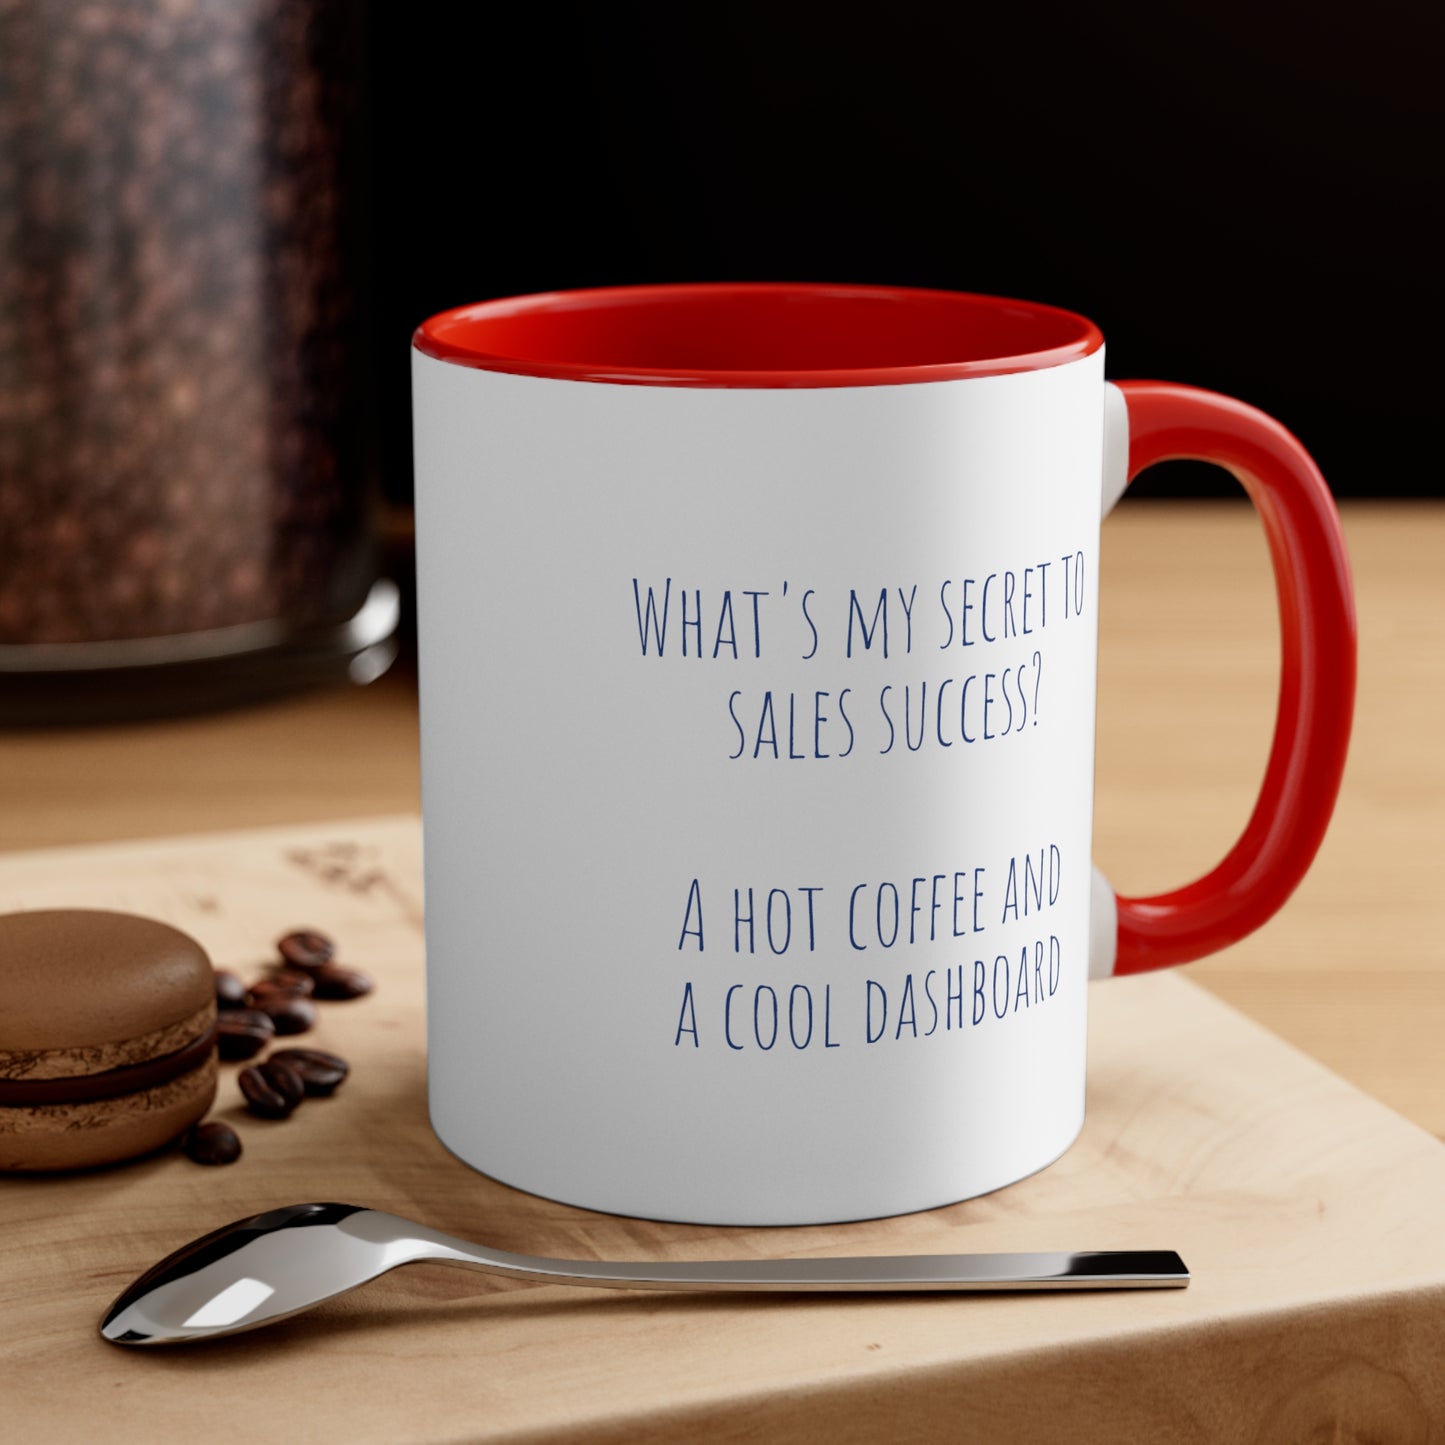 What's my secret to sales success? A hot coffee and a cool dashboard